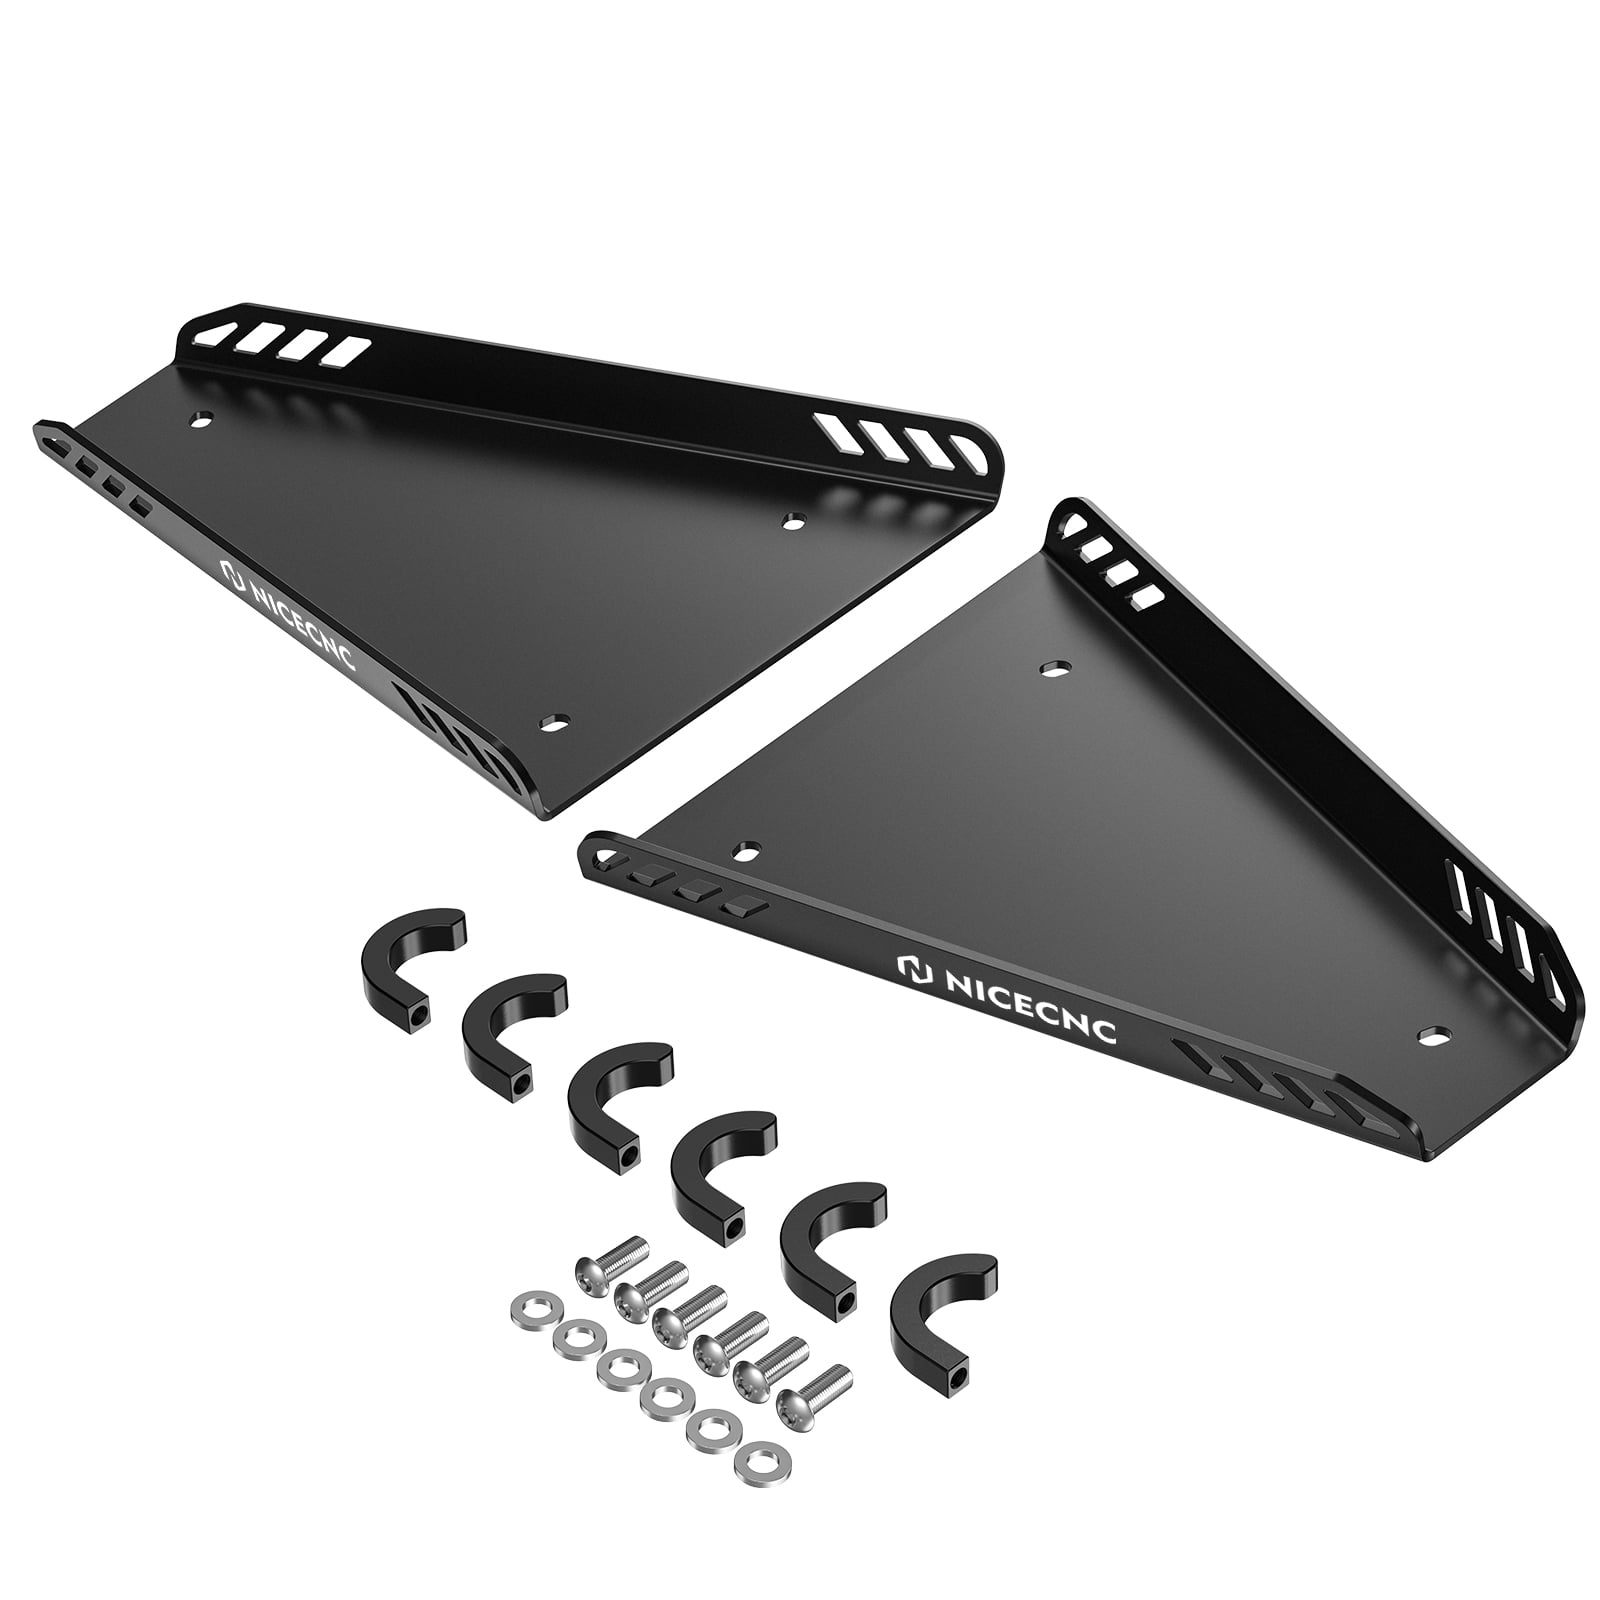 Pair Front A-Arm Guard Skid Plate Shield Cover Protection For Yamaha Blaster 200 1988-2006